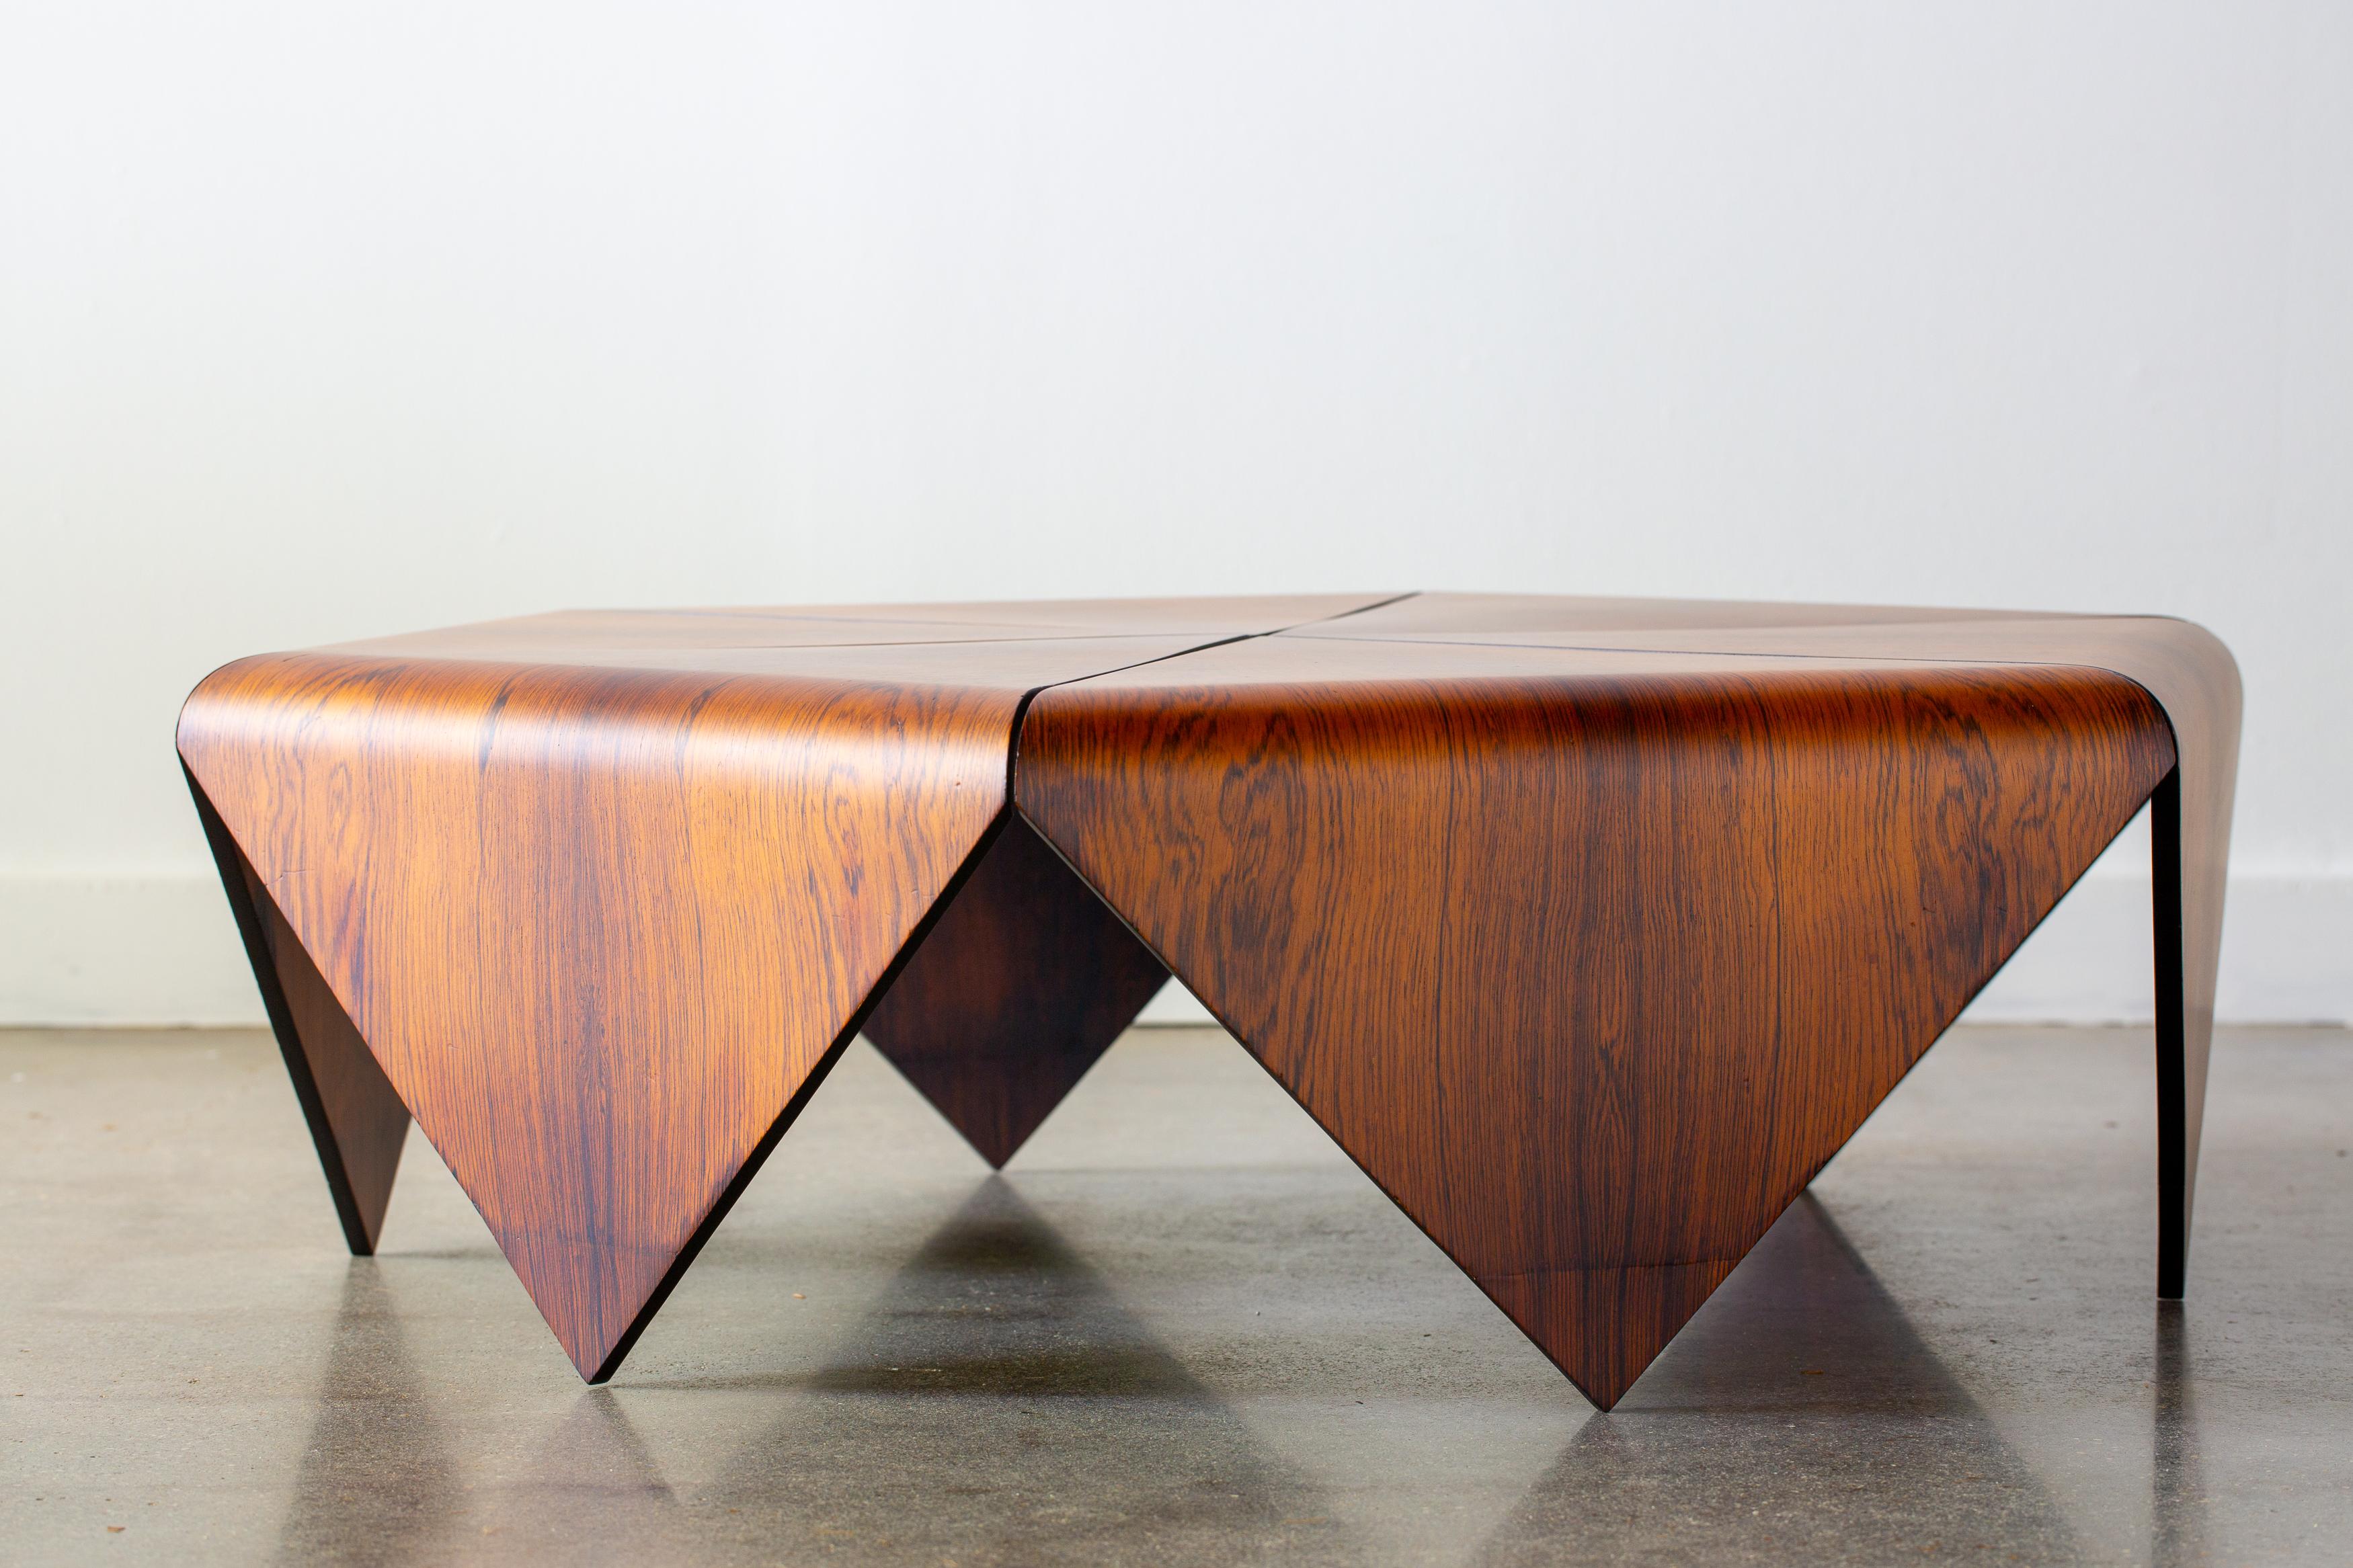 Exceedingly rare 1960s Jorge Zalszupin Petalas coffee table. This table purchased from the original owner in Richmond Virginia.  Only a few examples have ever resurfaced. The original owner purchased this example from a Brazilian record store that